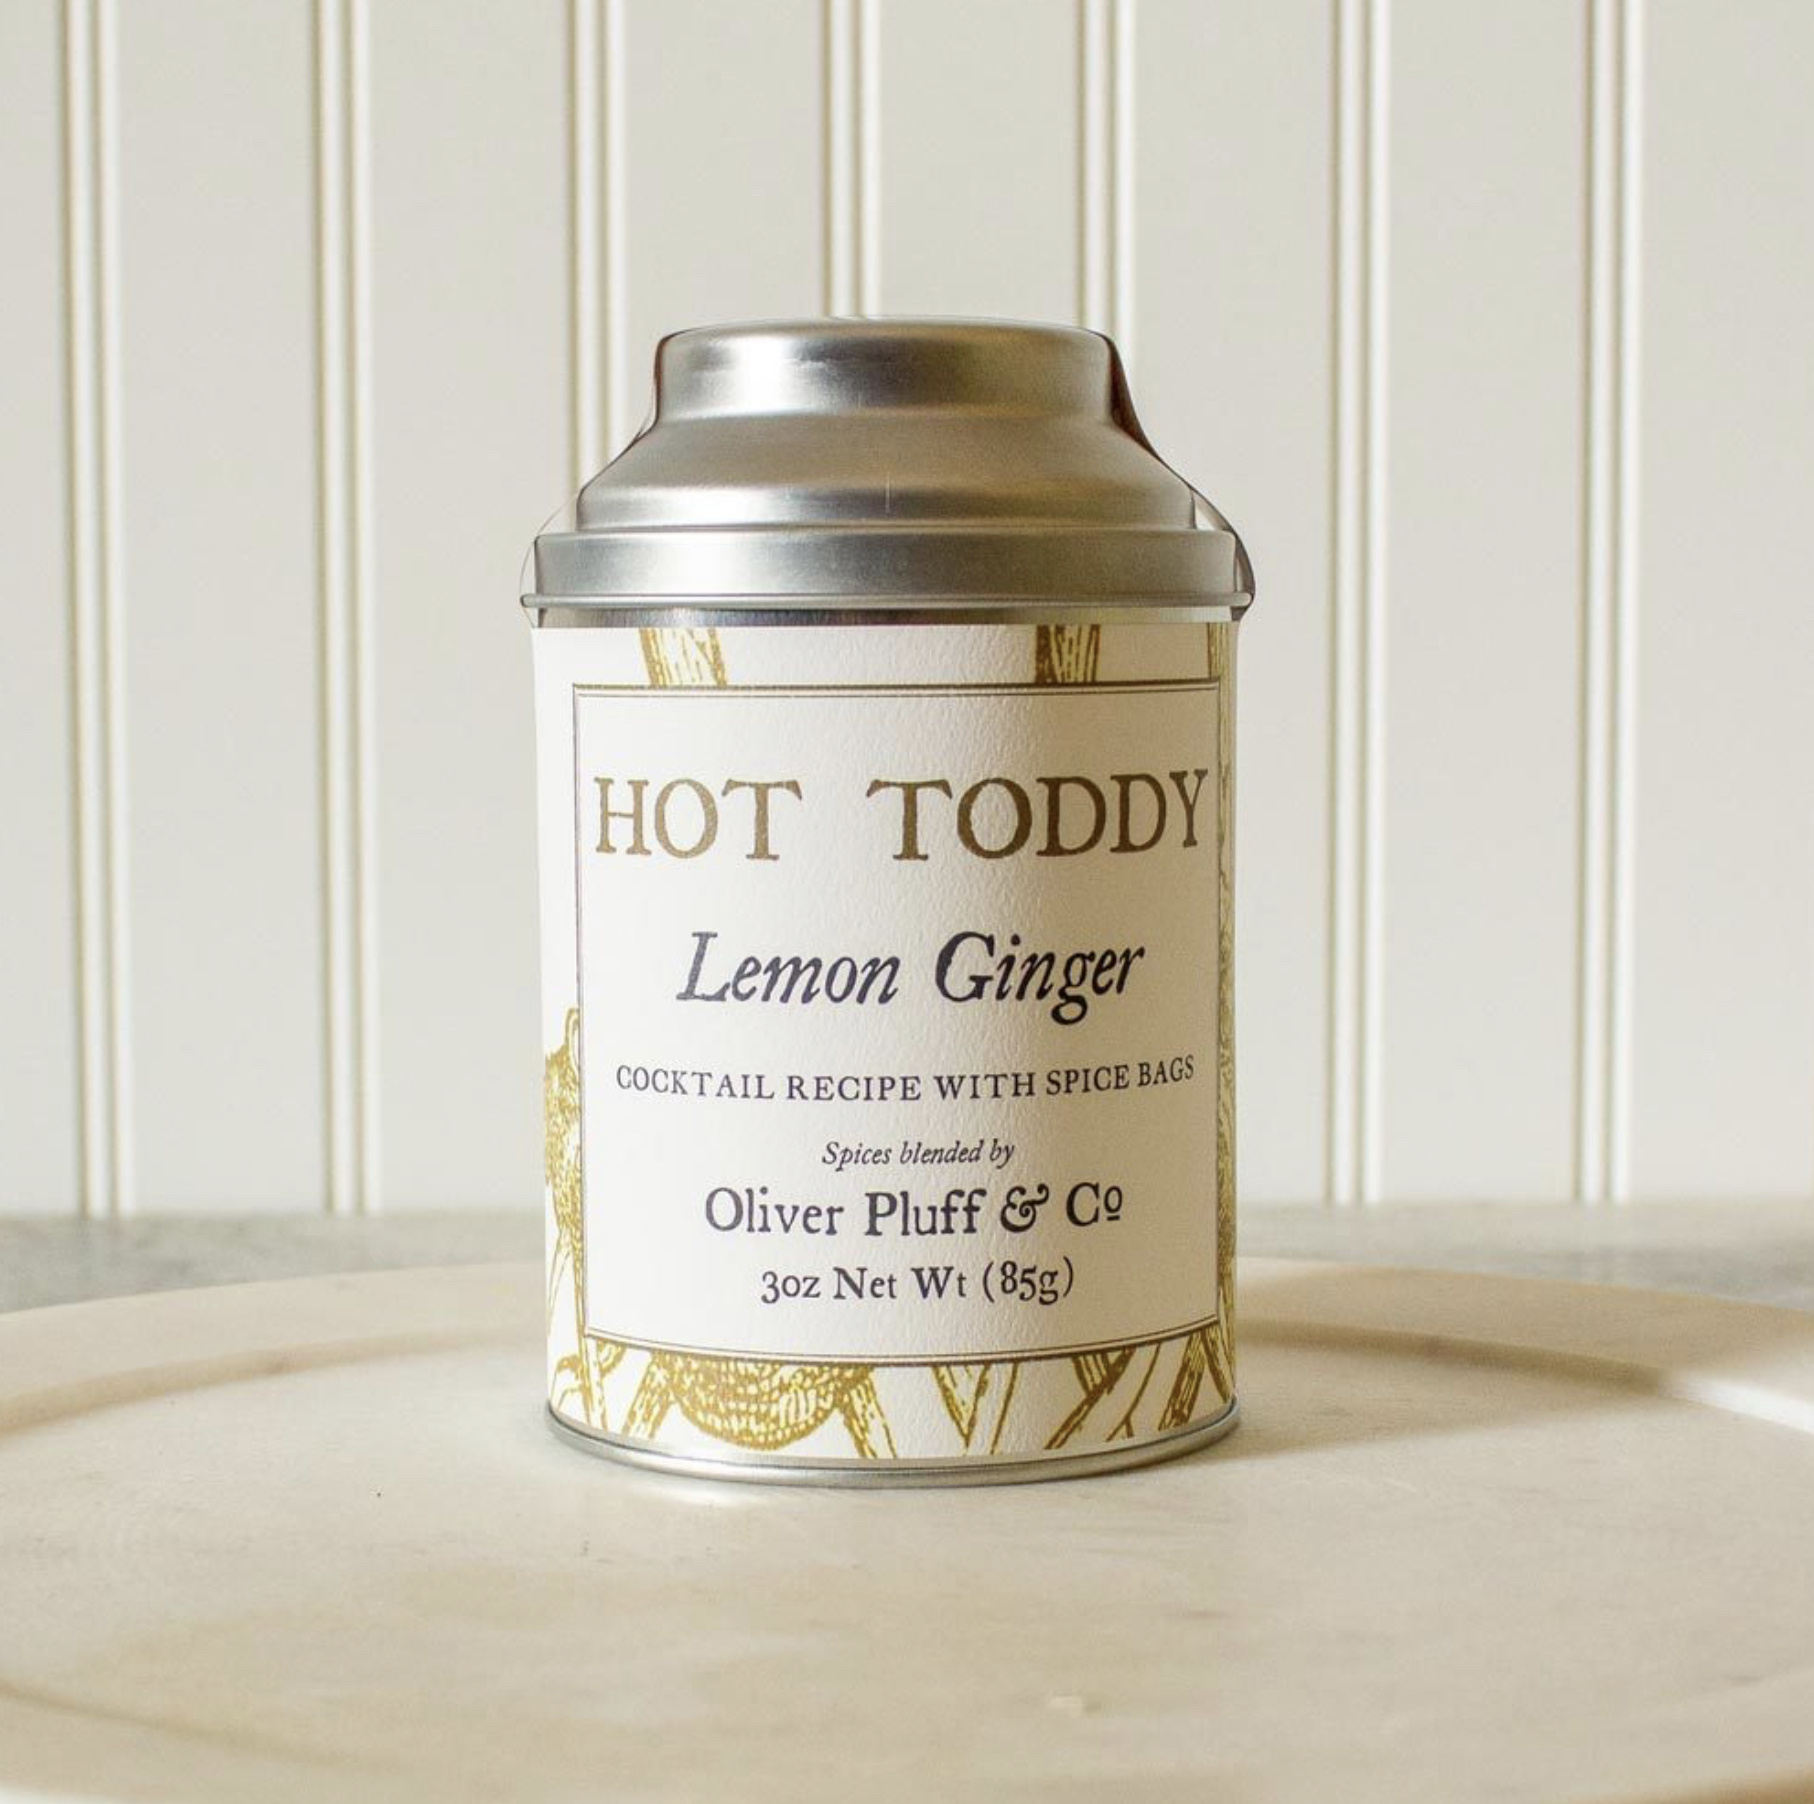 Oliver Pluff and Company Lemon Ginger Hot Toddy Kit